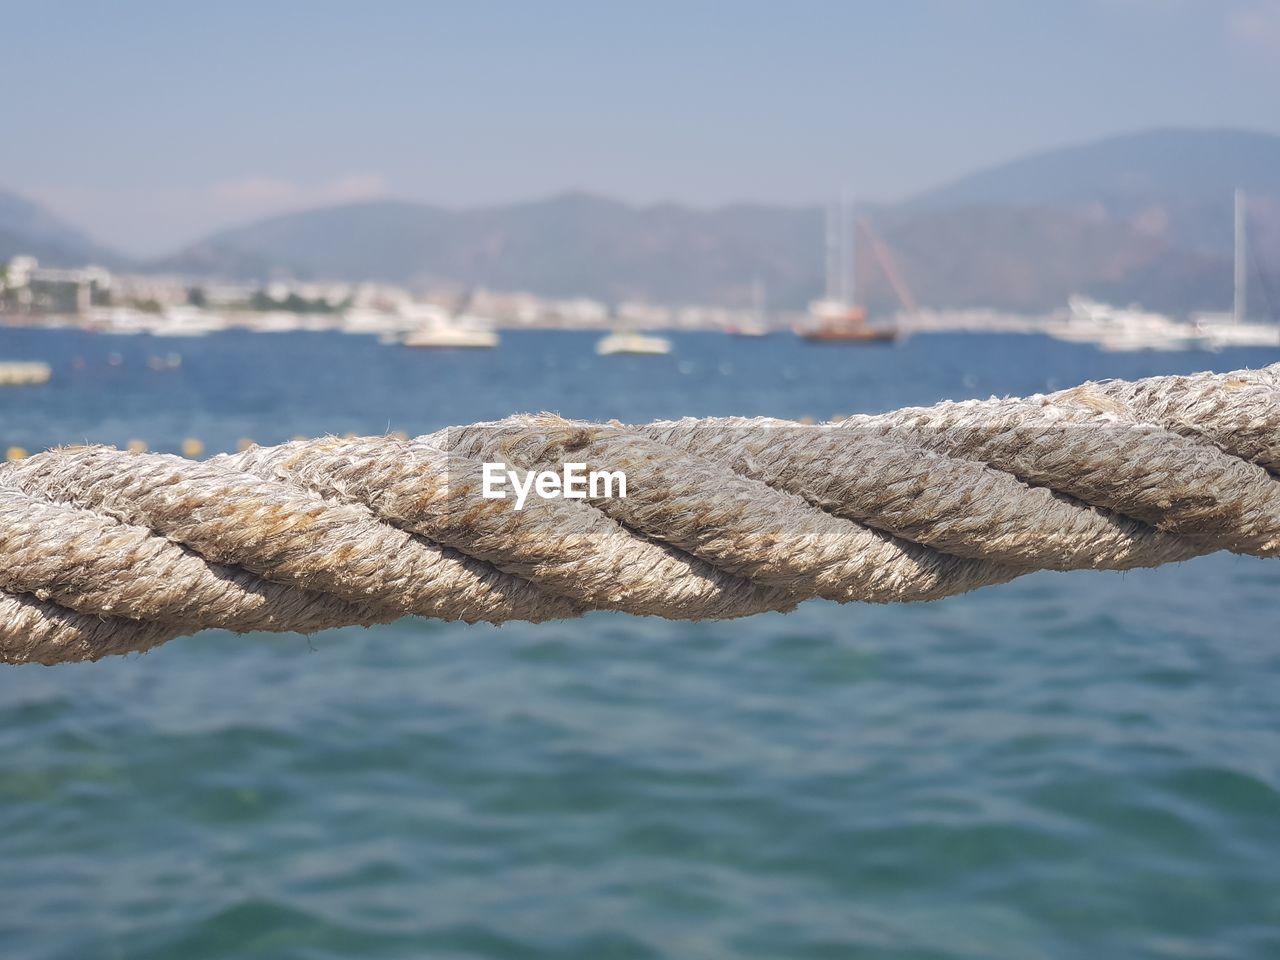 CLOSE-UP OF ROPE AGAINST SKY